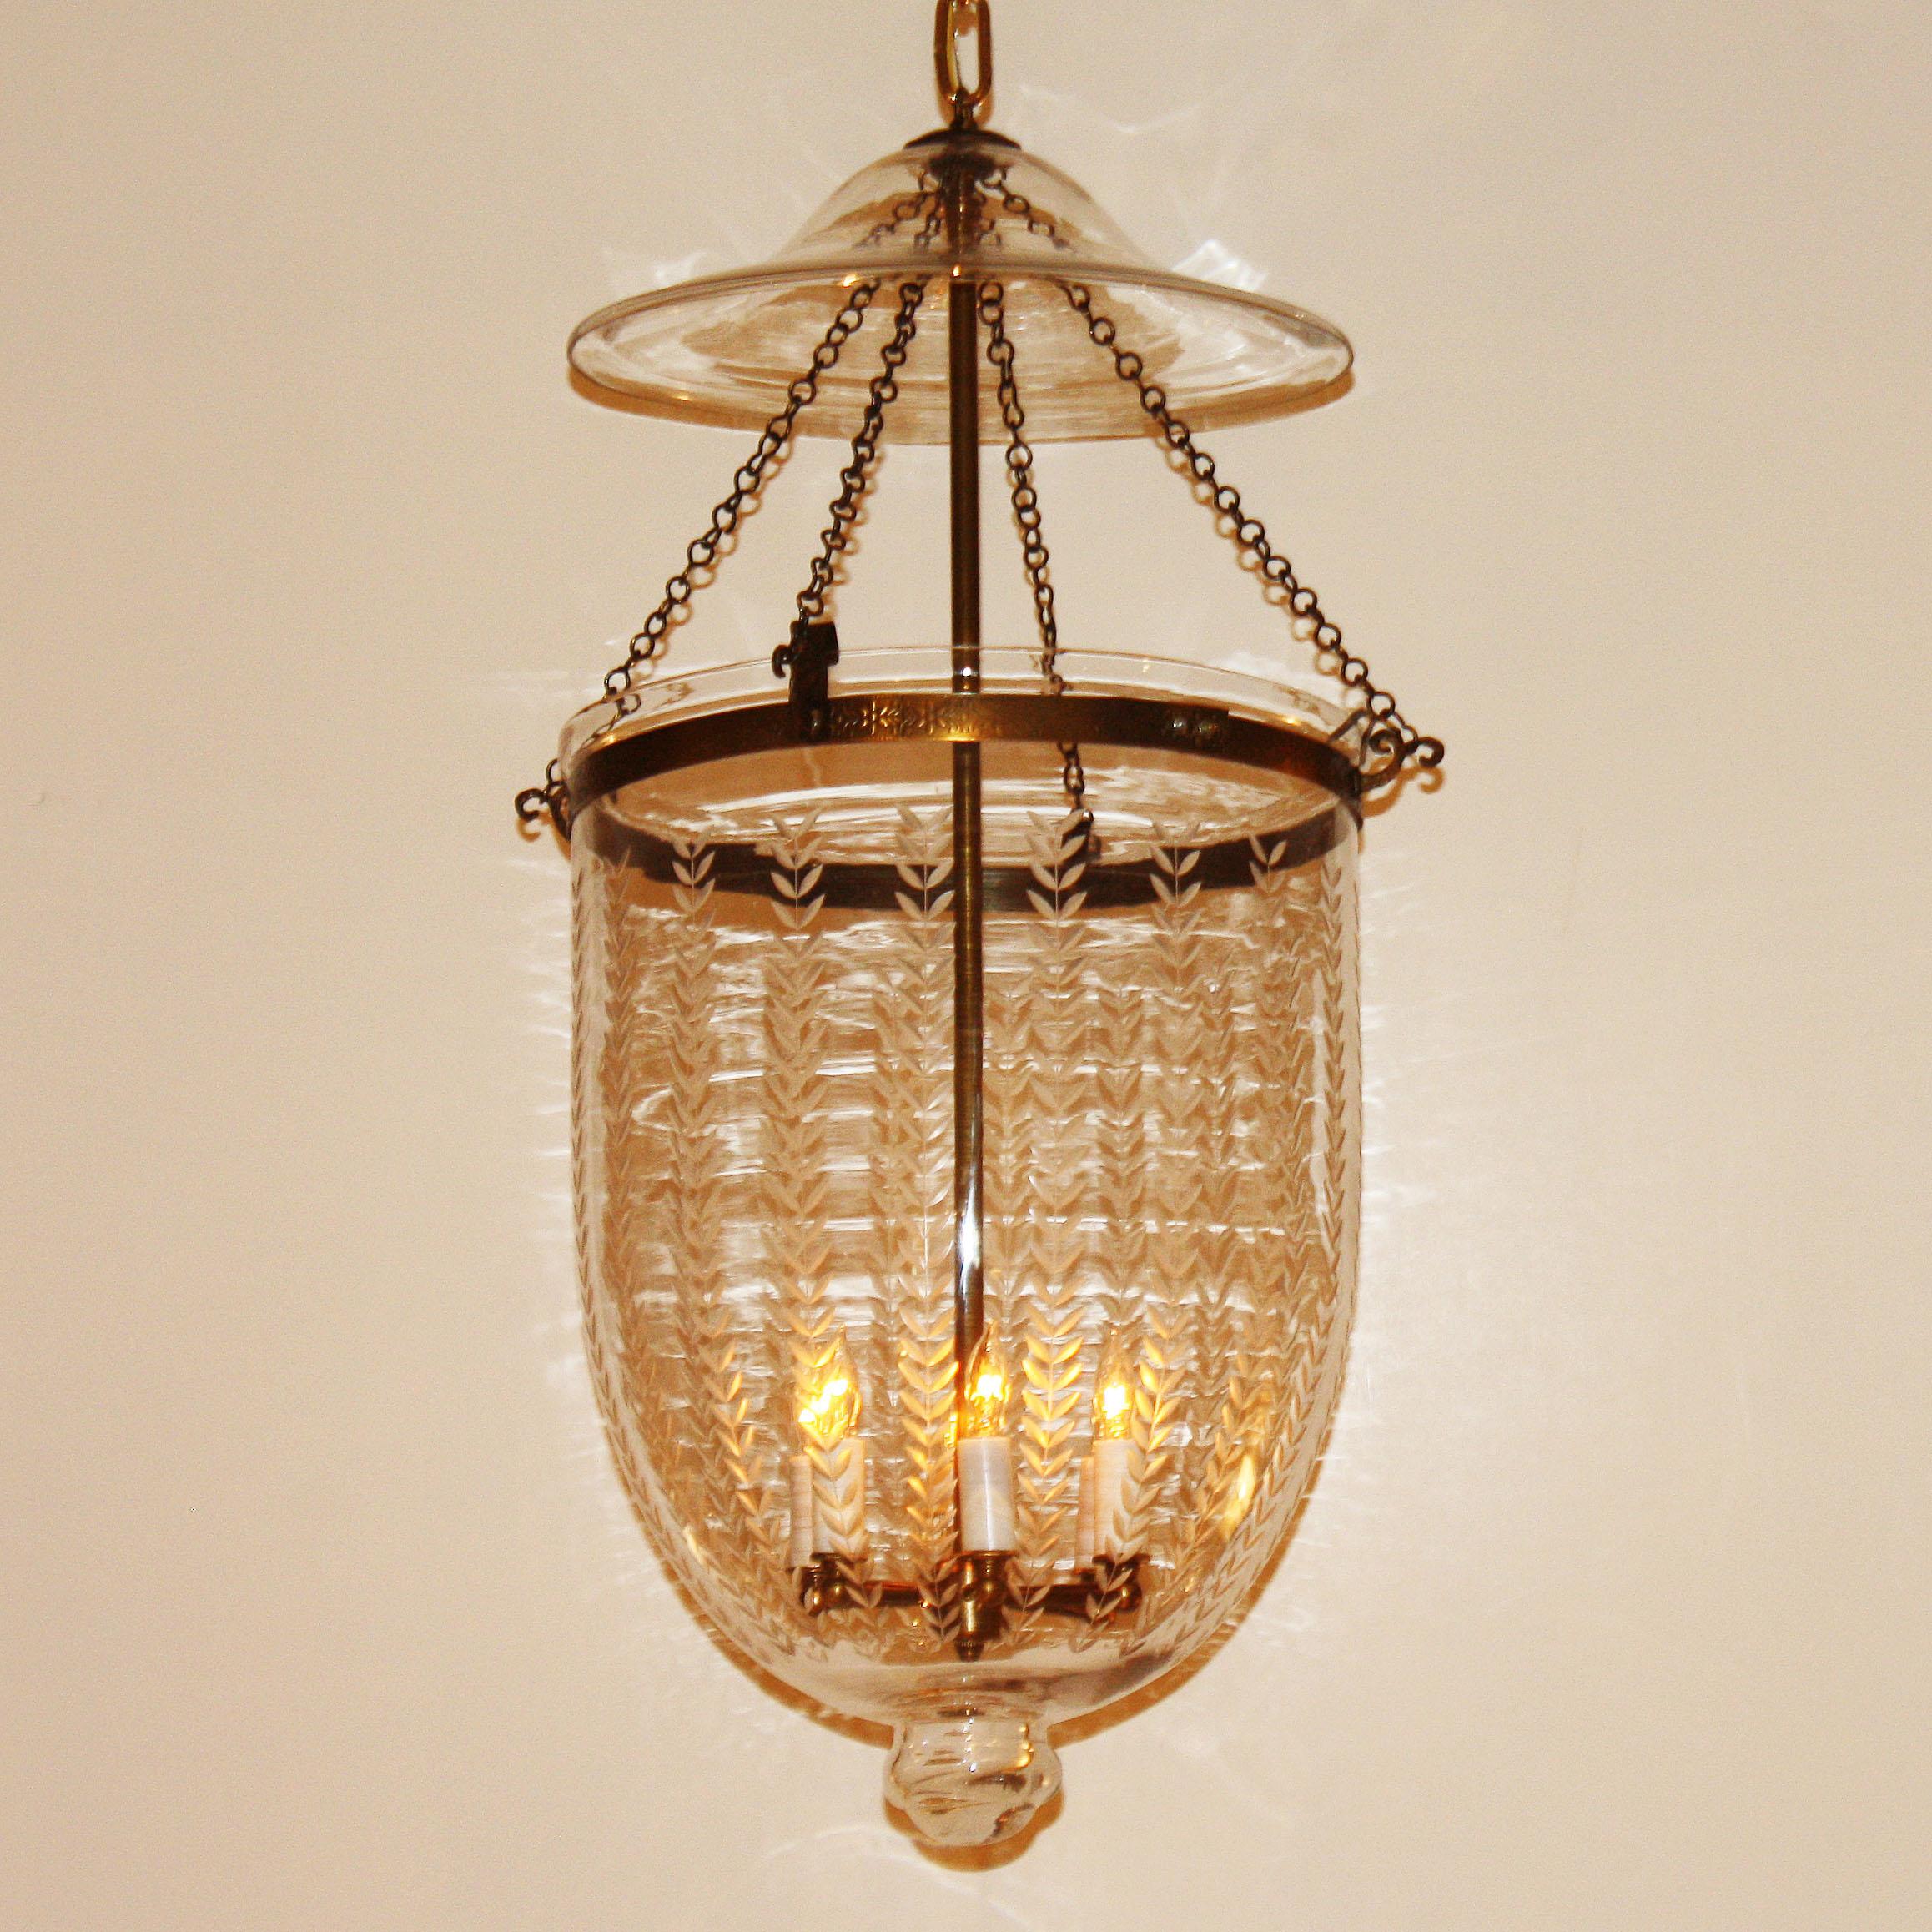 Etched bell lantern with brass details, circa 1950.
$7500.